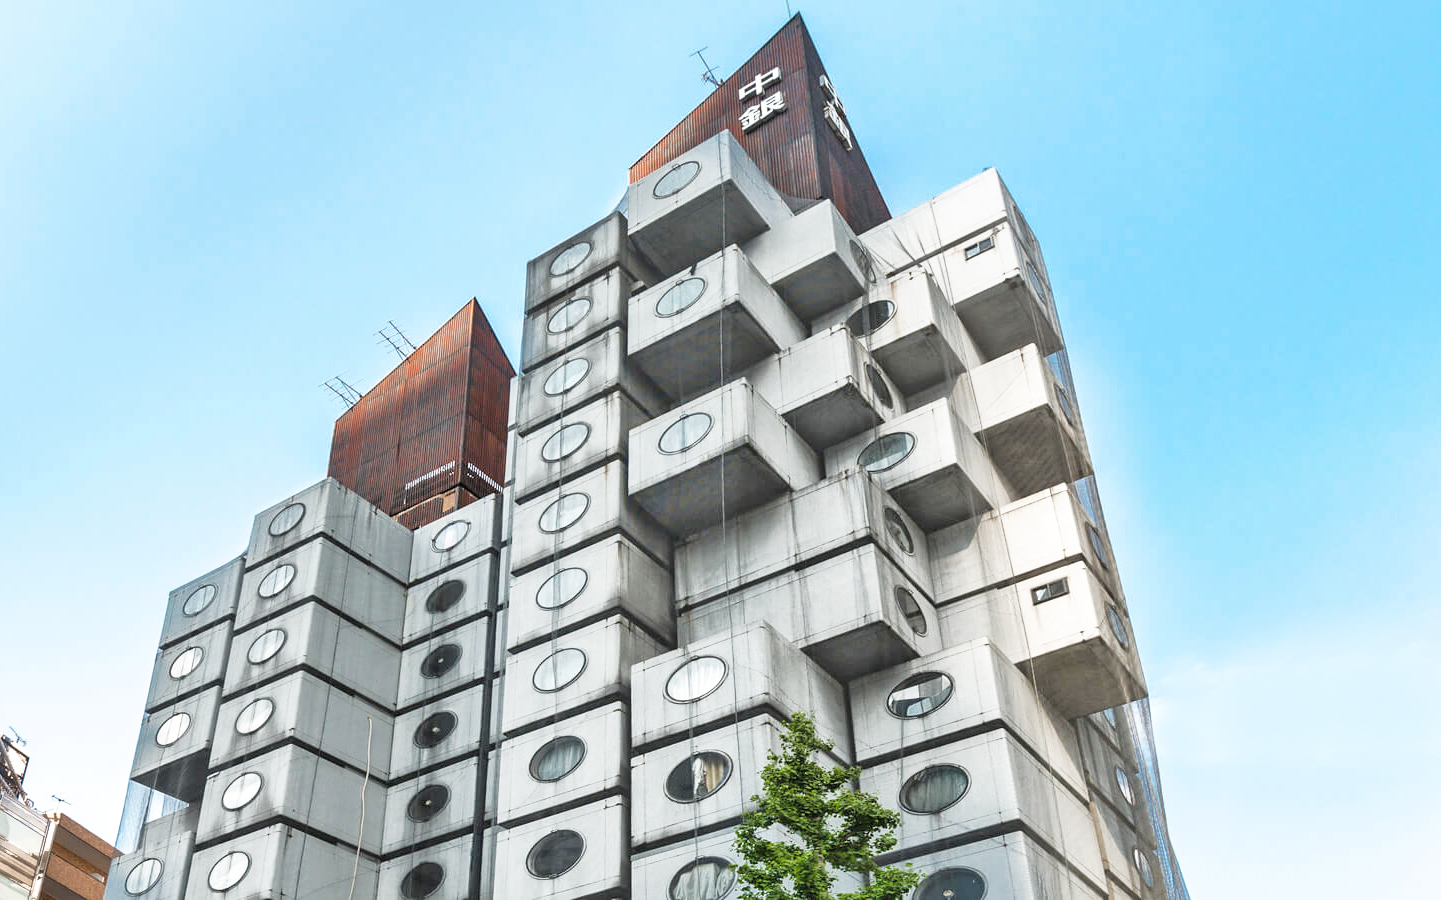 Nakagin Capsule Tower - Unusual and quirky things to see and do in Tokyo